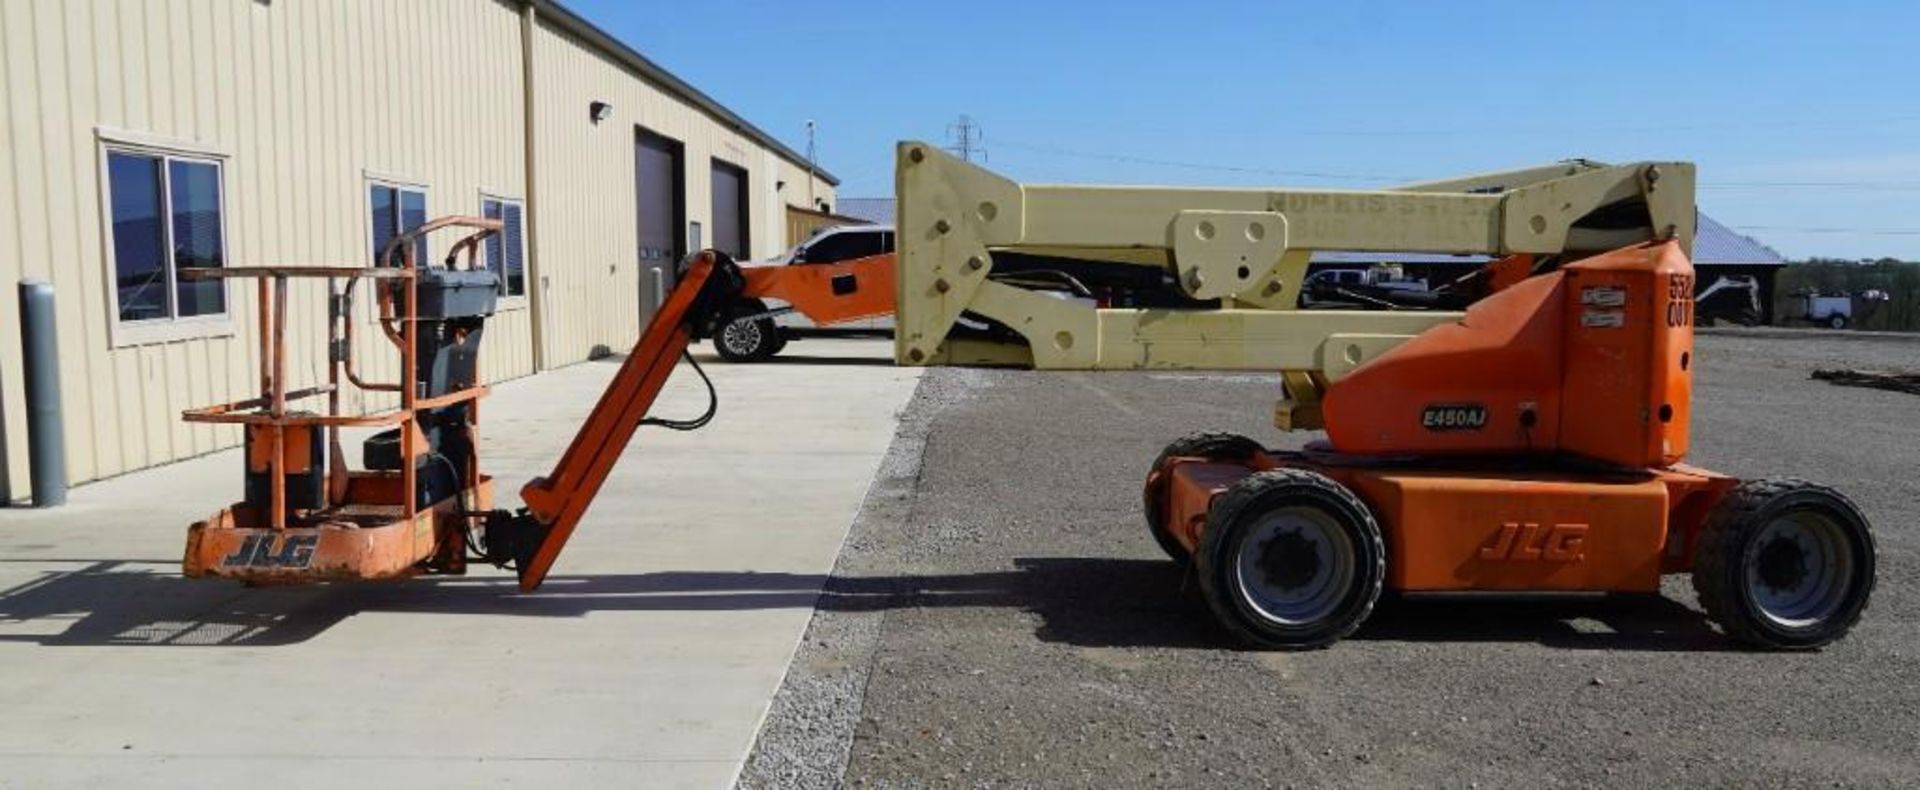 2006 JLG Electric Manlift - Image 2 of 30